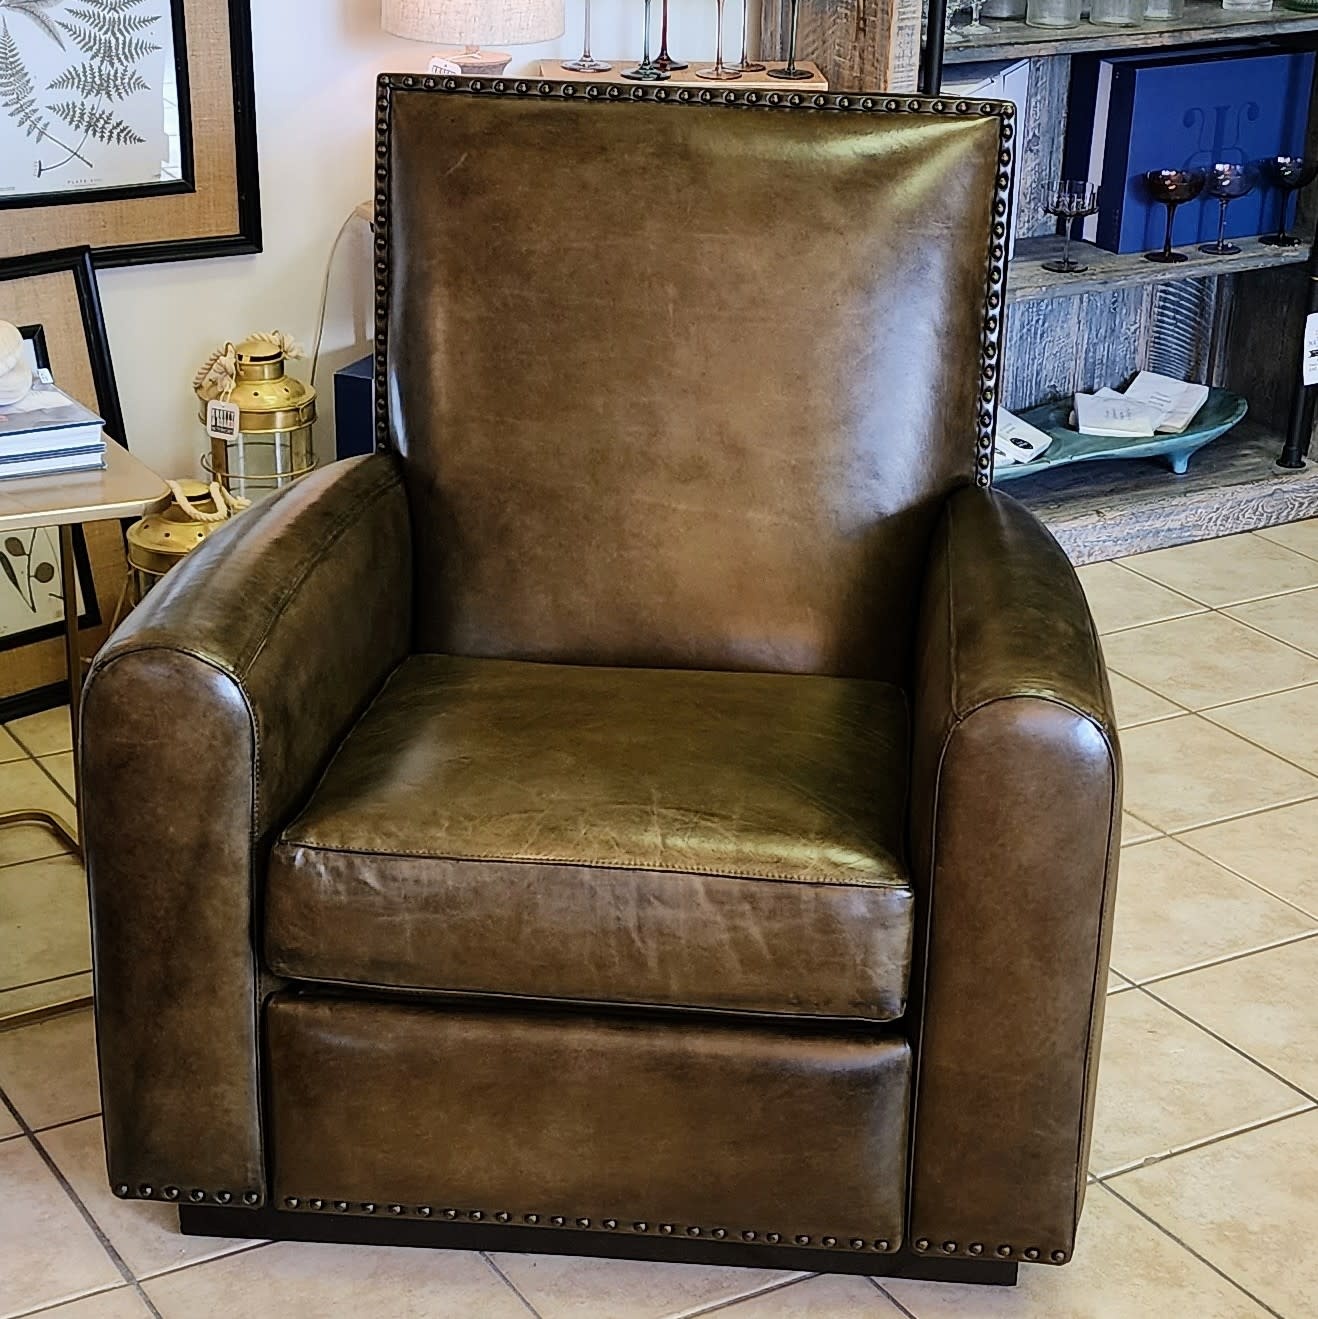 Motioncraft 5640 Leather Recliner, 37 x 38 x 39 Customizable, Furniture Available for Local Delivery or Pick Up